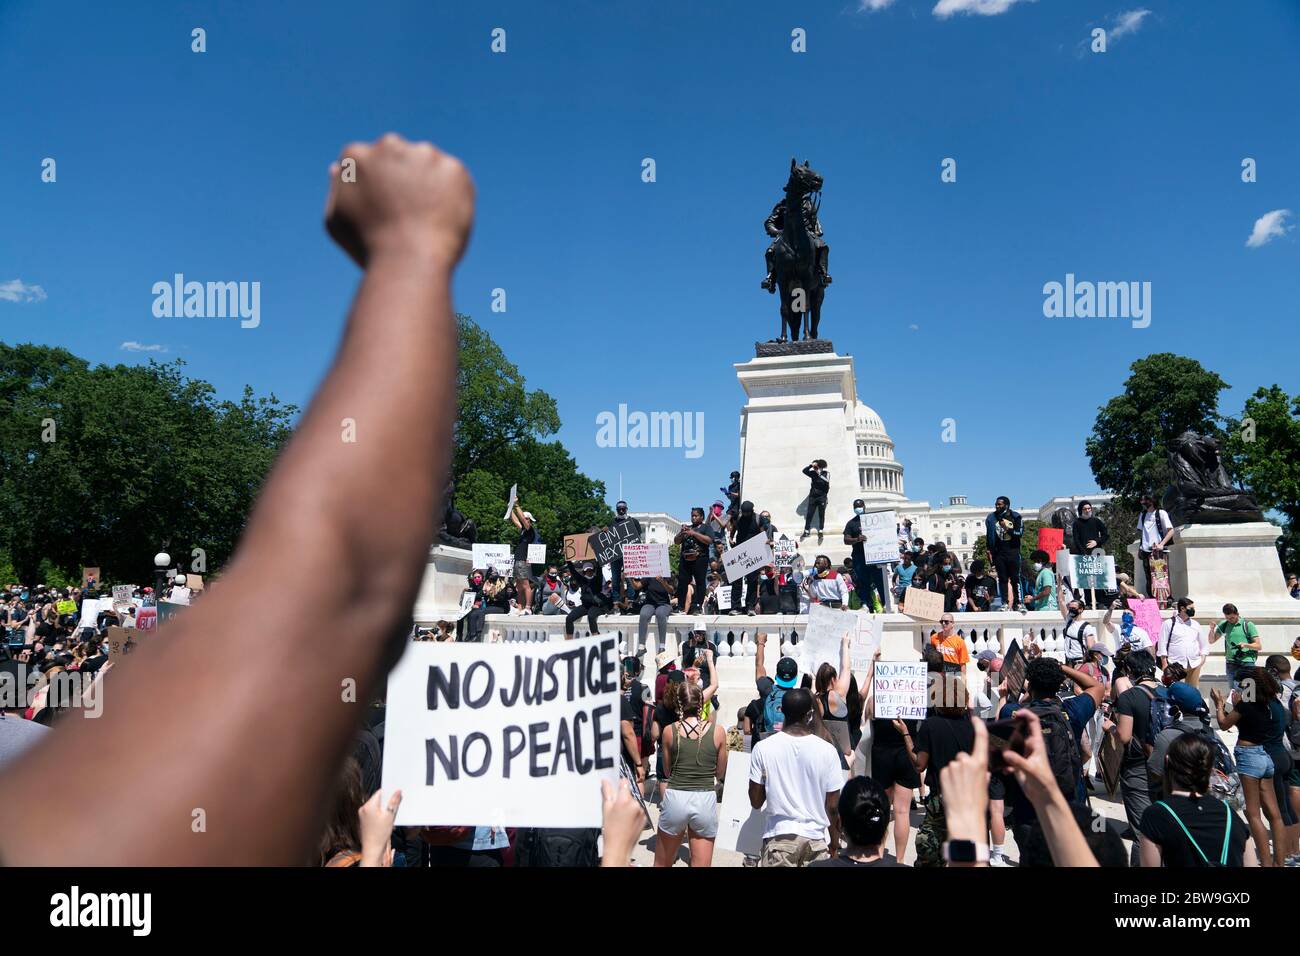 Washington, DC, USA. 30th May, 2020. Protesters rally near the Capitol Building during a protest over the death of George Floyd in Washington, DC, the United States, on May 30, 2020. Demonstrations and riots have spread to cities across the United States after a video went viral of George Floyd being suffocated to death by a white police officer in the midwest U.S. state of Minnesota on May 25. Credit: Liu Jie/Xinhua/Alamy Live News Stock Photo